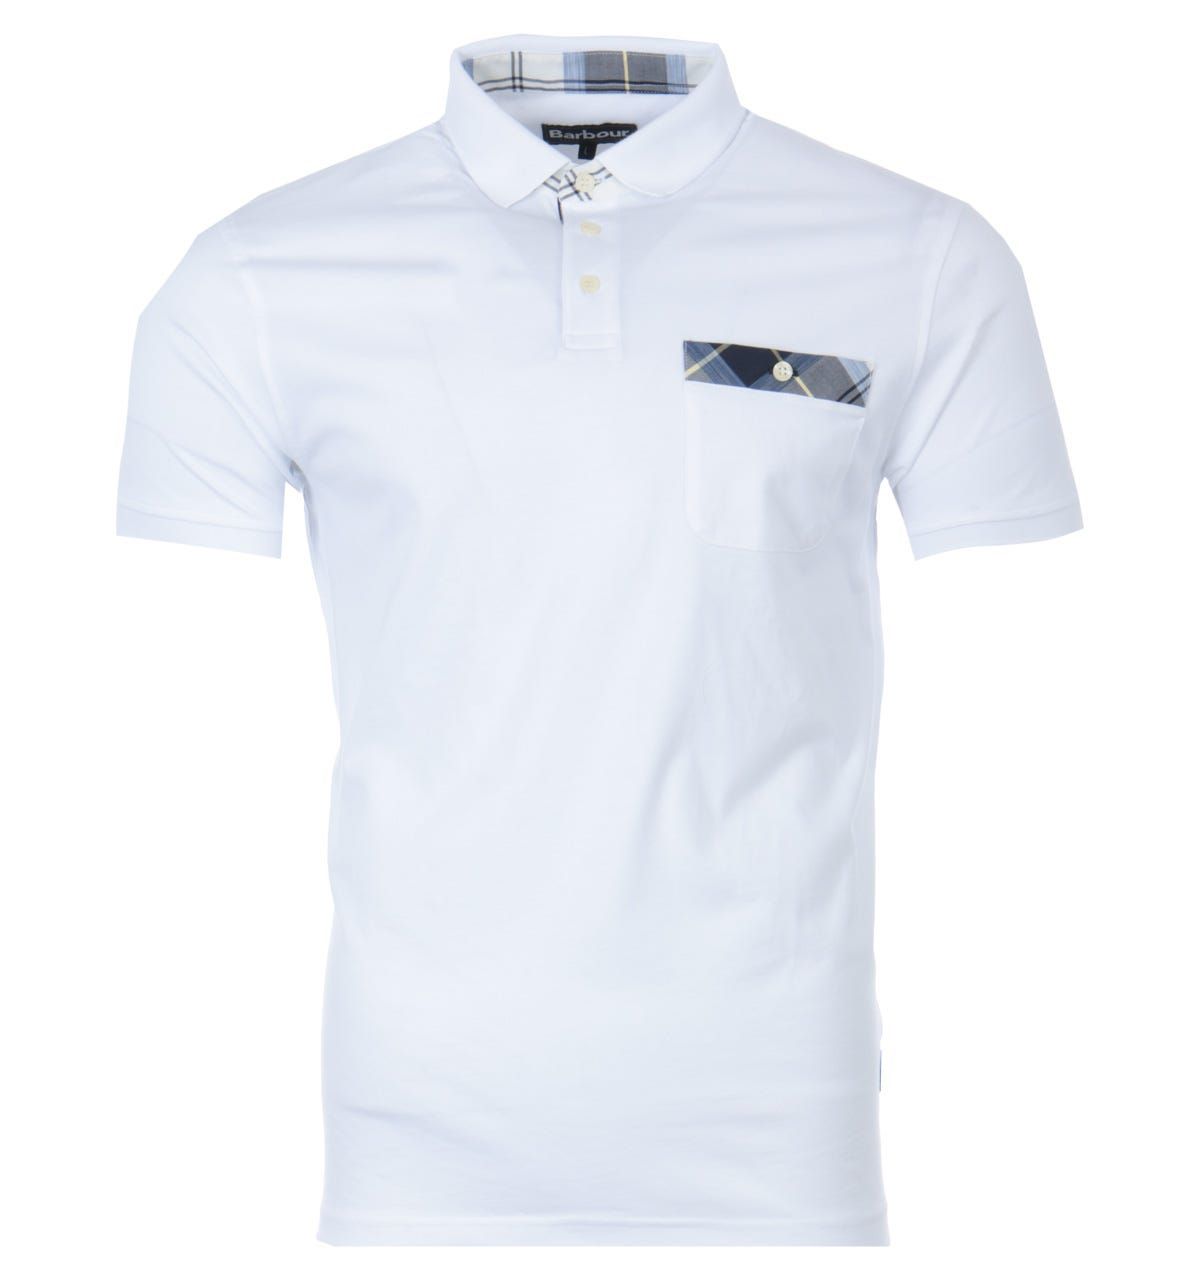 The Barbour Lirst Short Sleeve Polo Shirt is a Barbourised take on the classic style. With a tartan placket lining and chest pocket trim. Featuring a patch chest pocket with embroidered Barbour detail. A three button placket for maximum personalisation. Make this classic a part of your go to wardrobe.\nRegular Fit, Short Sleeve, Three Button Placket, Tartan Placket Lining, Patch Pocket, Barbour Branding. Style & Fit:Regular Fit, Fits True to Size. Composition & Care:100% Cotton, Machine Wash.